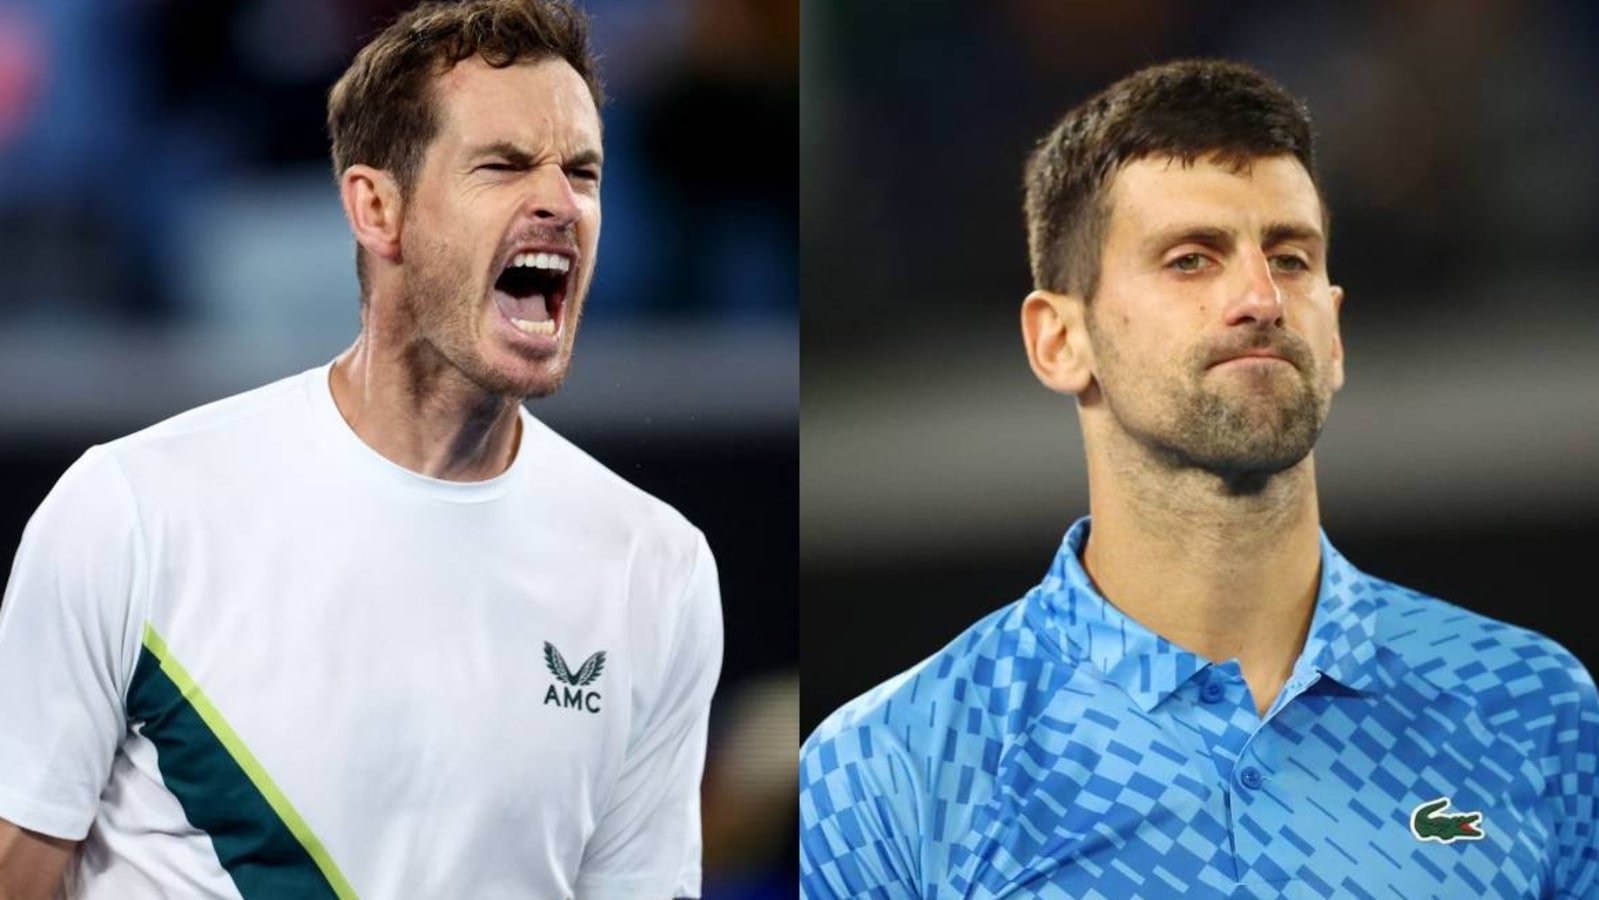 Djokovic reacts after Murray wins 2nd longest match at AO in 5 hrs and 45 mins Tennis News